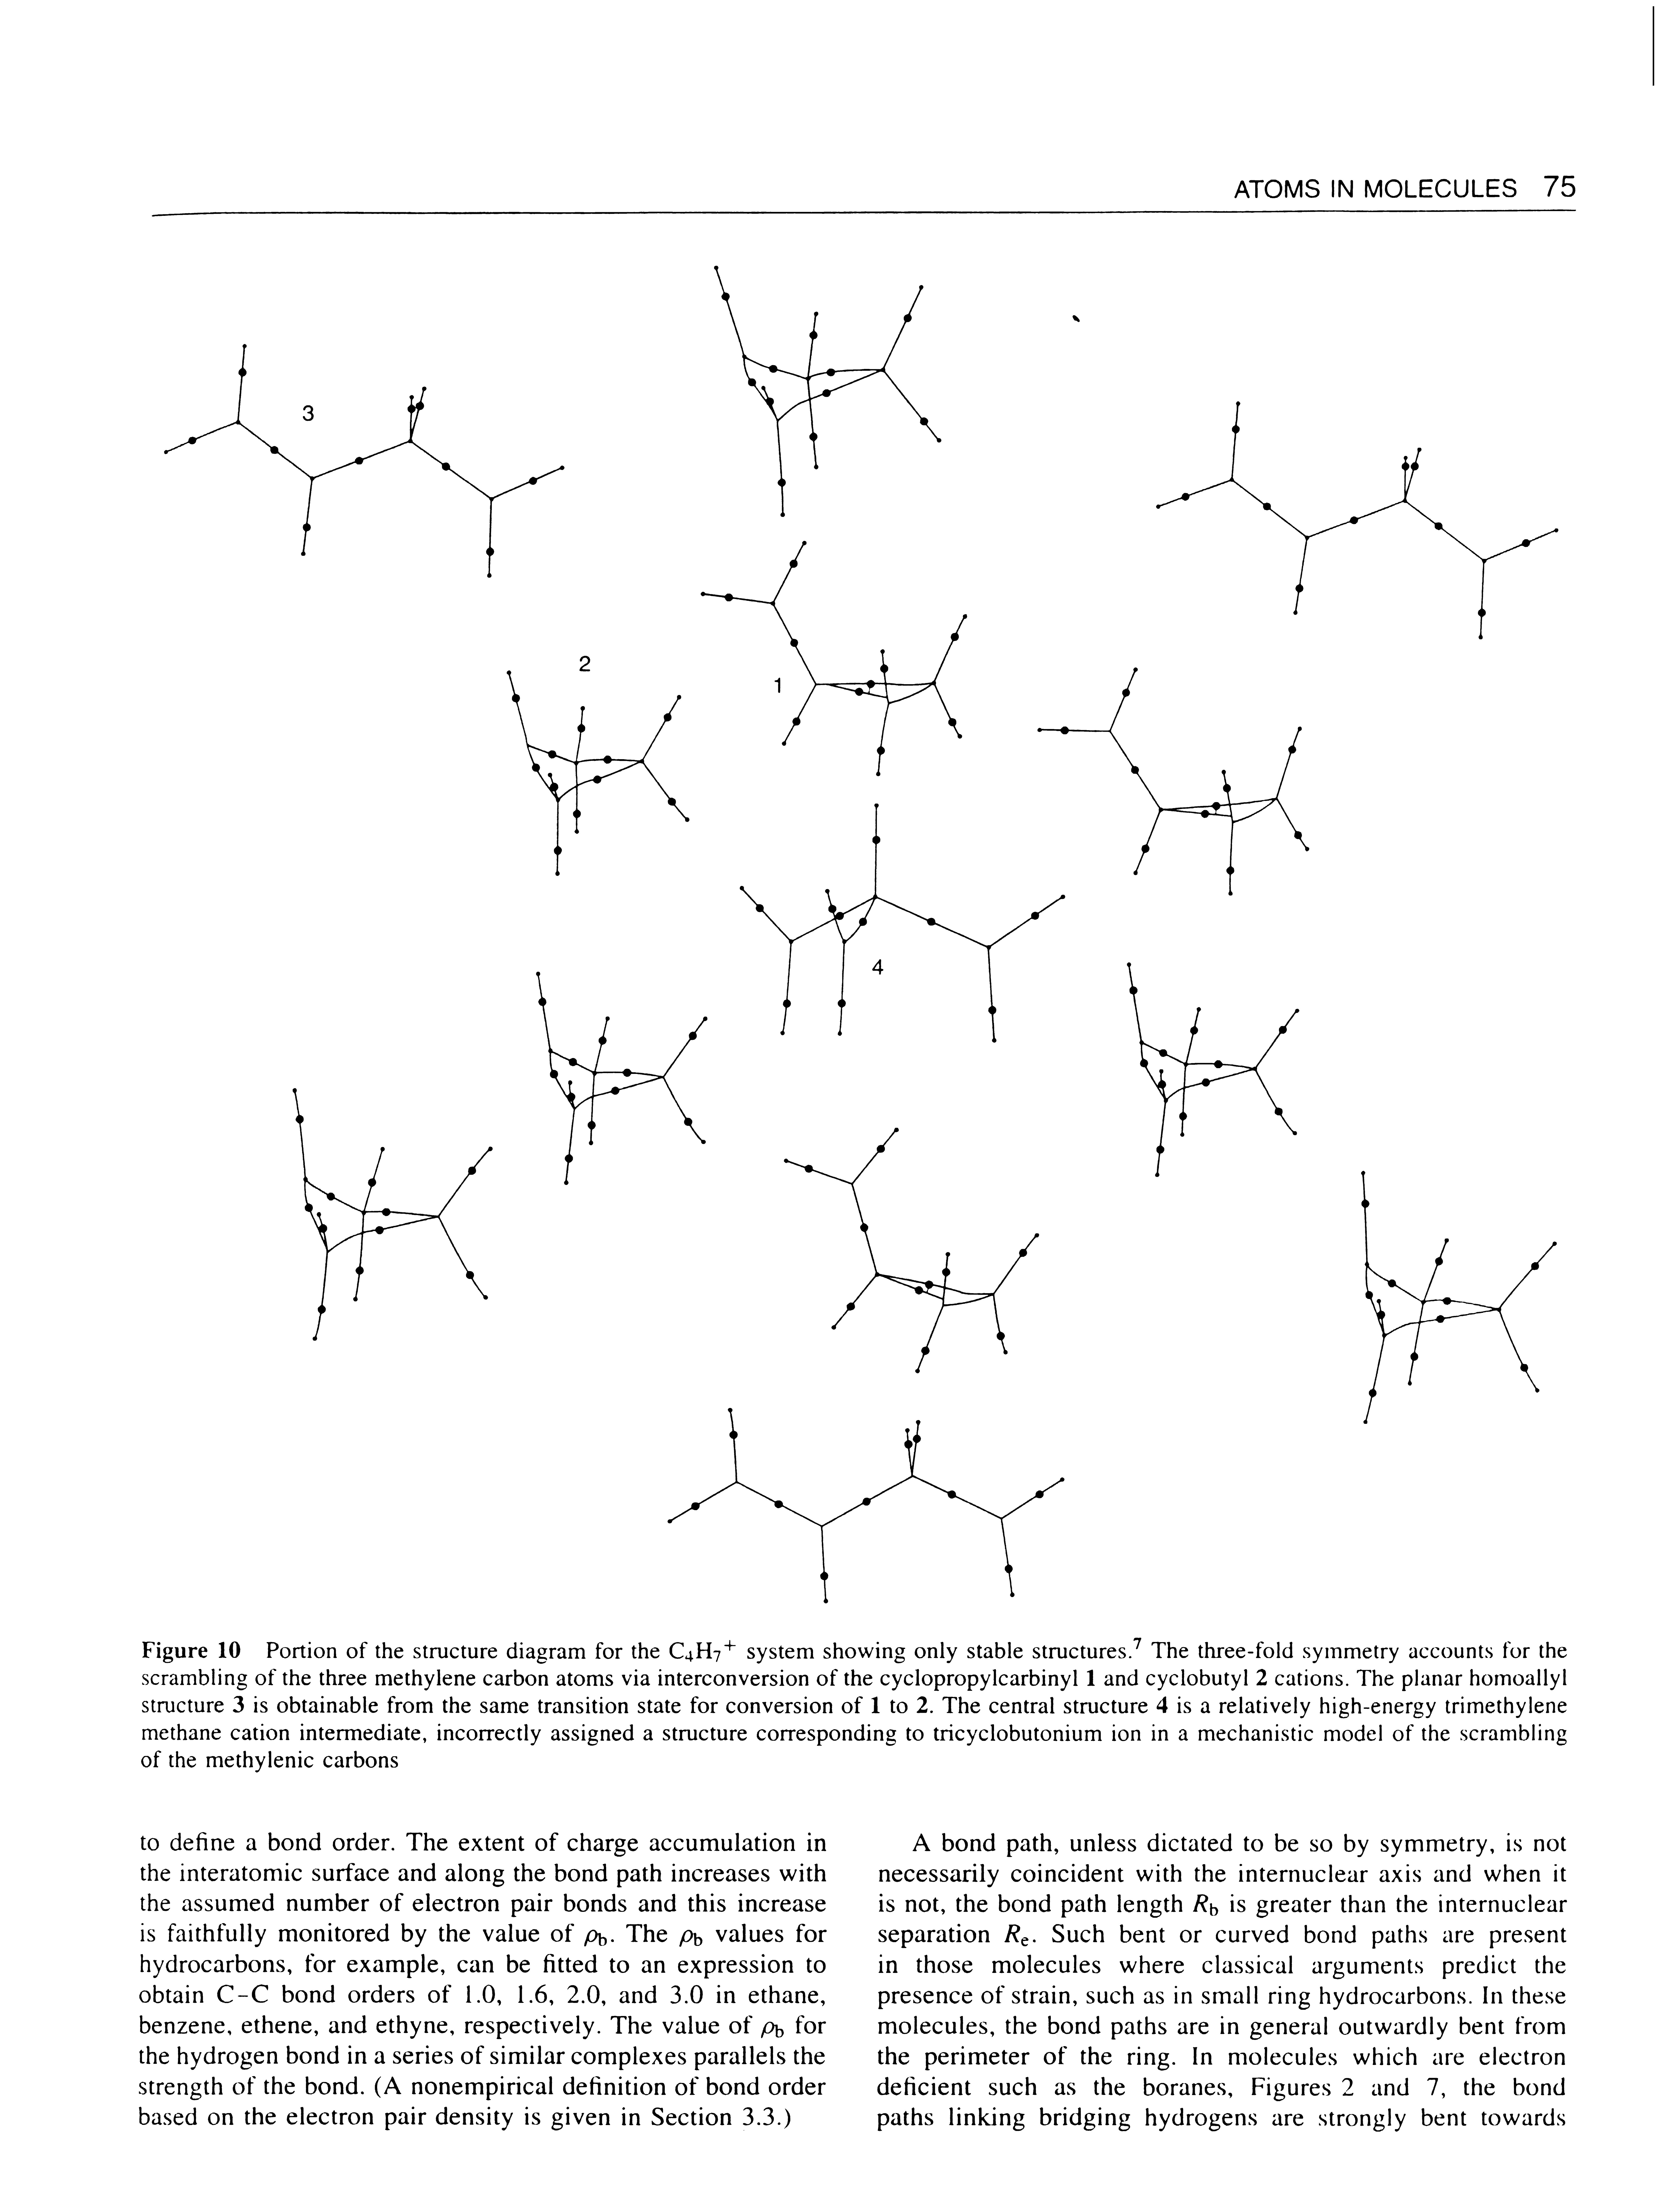 Figure 10 Portion of the structure diagram for the C4H7 system showing only stable structures. The three-fold symmetry accounts for the scrambling of the three methylene carbon atoms via interconversion of the cyclopropylcarbinyl 1 and cyclobutyl 2 cations. The planar homoallyl structure 3 is obtainable from the same transition state for conversion of 1 to 2. The central structure 4 is a relatively high-energy trimethylene methane cation intermediate, incorrectly assigned a structure corresponding to tricyclobutonium ion in a mechanistic model of the scrambling of the methylenic carbons...